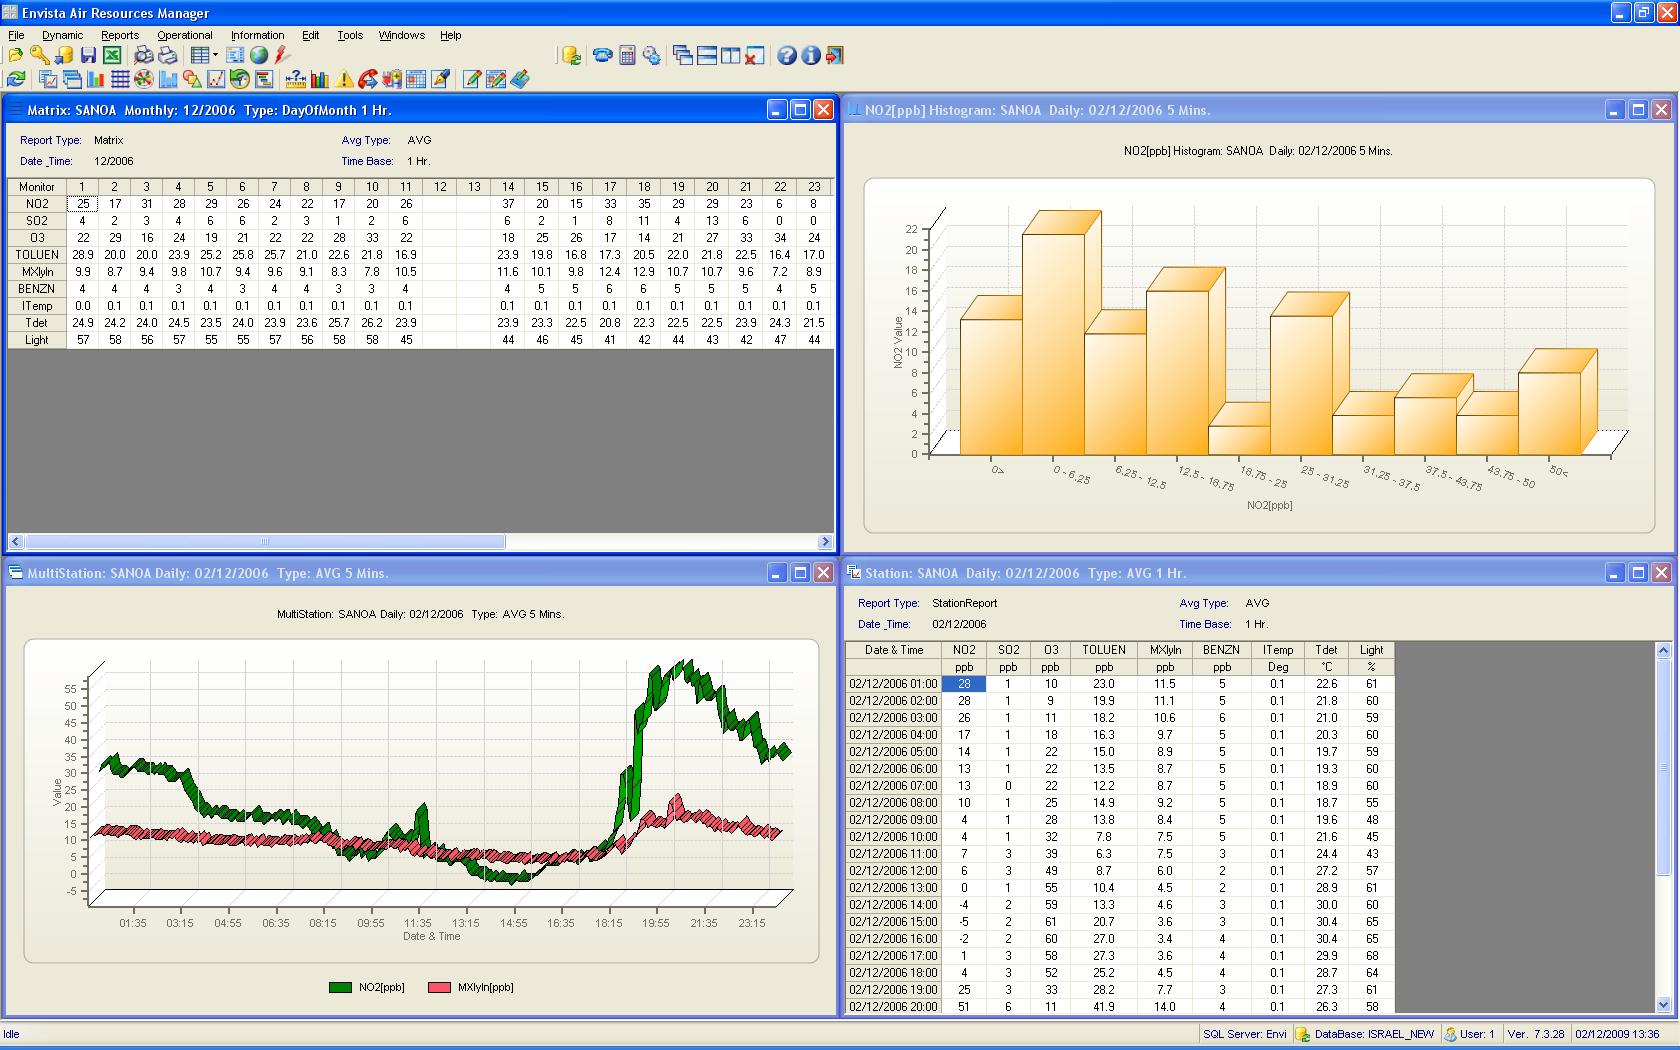 Envista ARM Reports-Example for 4 Air Monitoring reports from AQM/CEM sites, tiled horizontally using the "Windows" menu